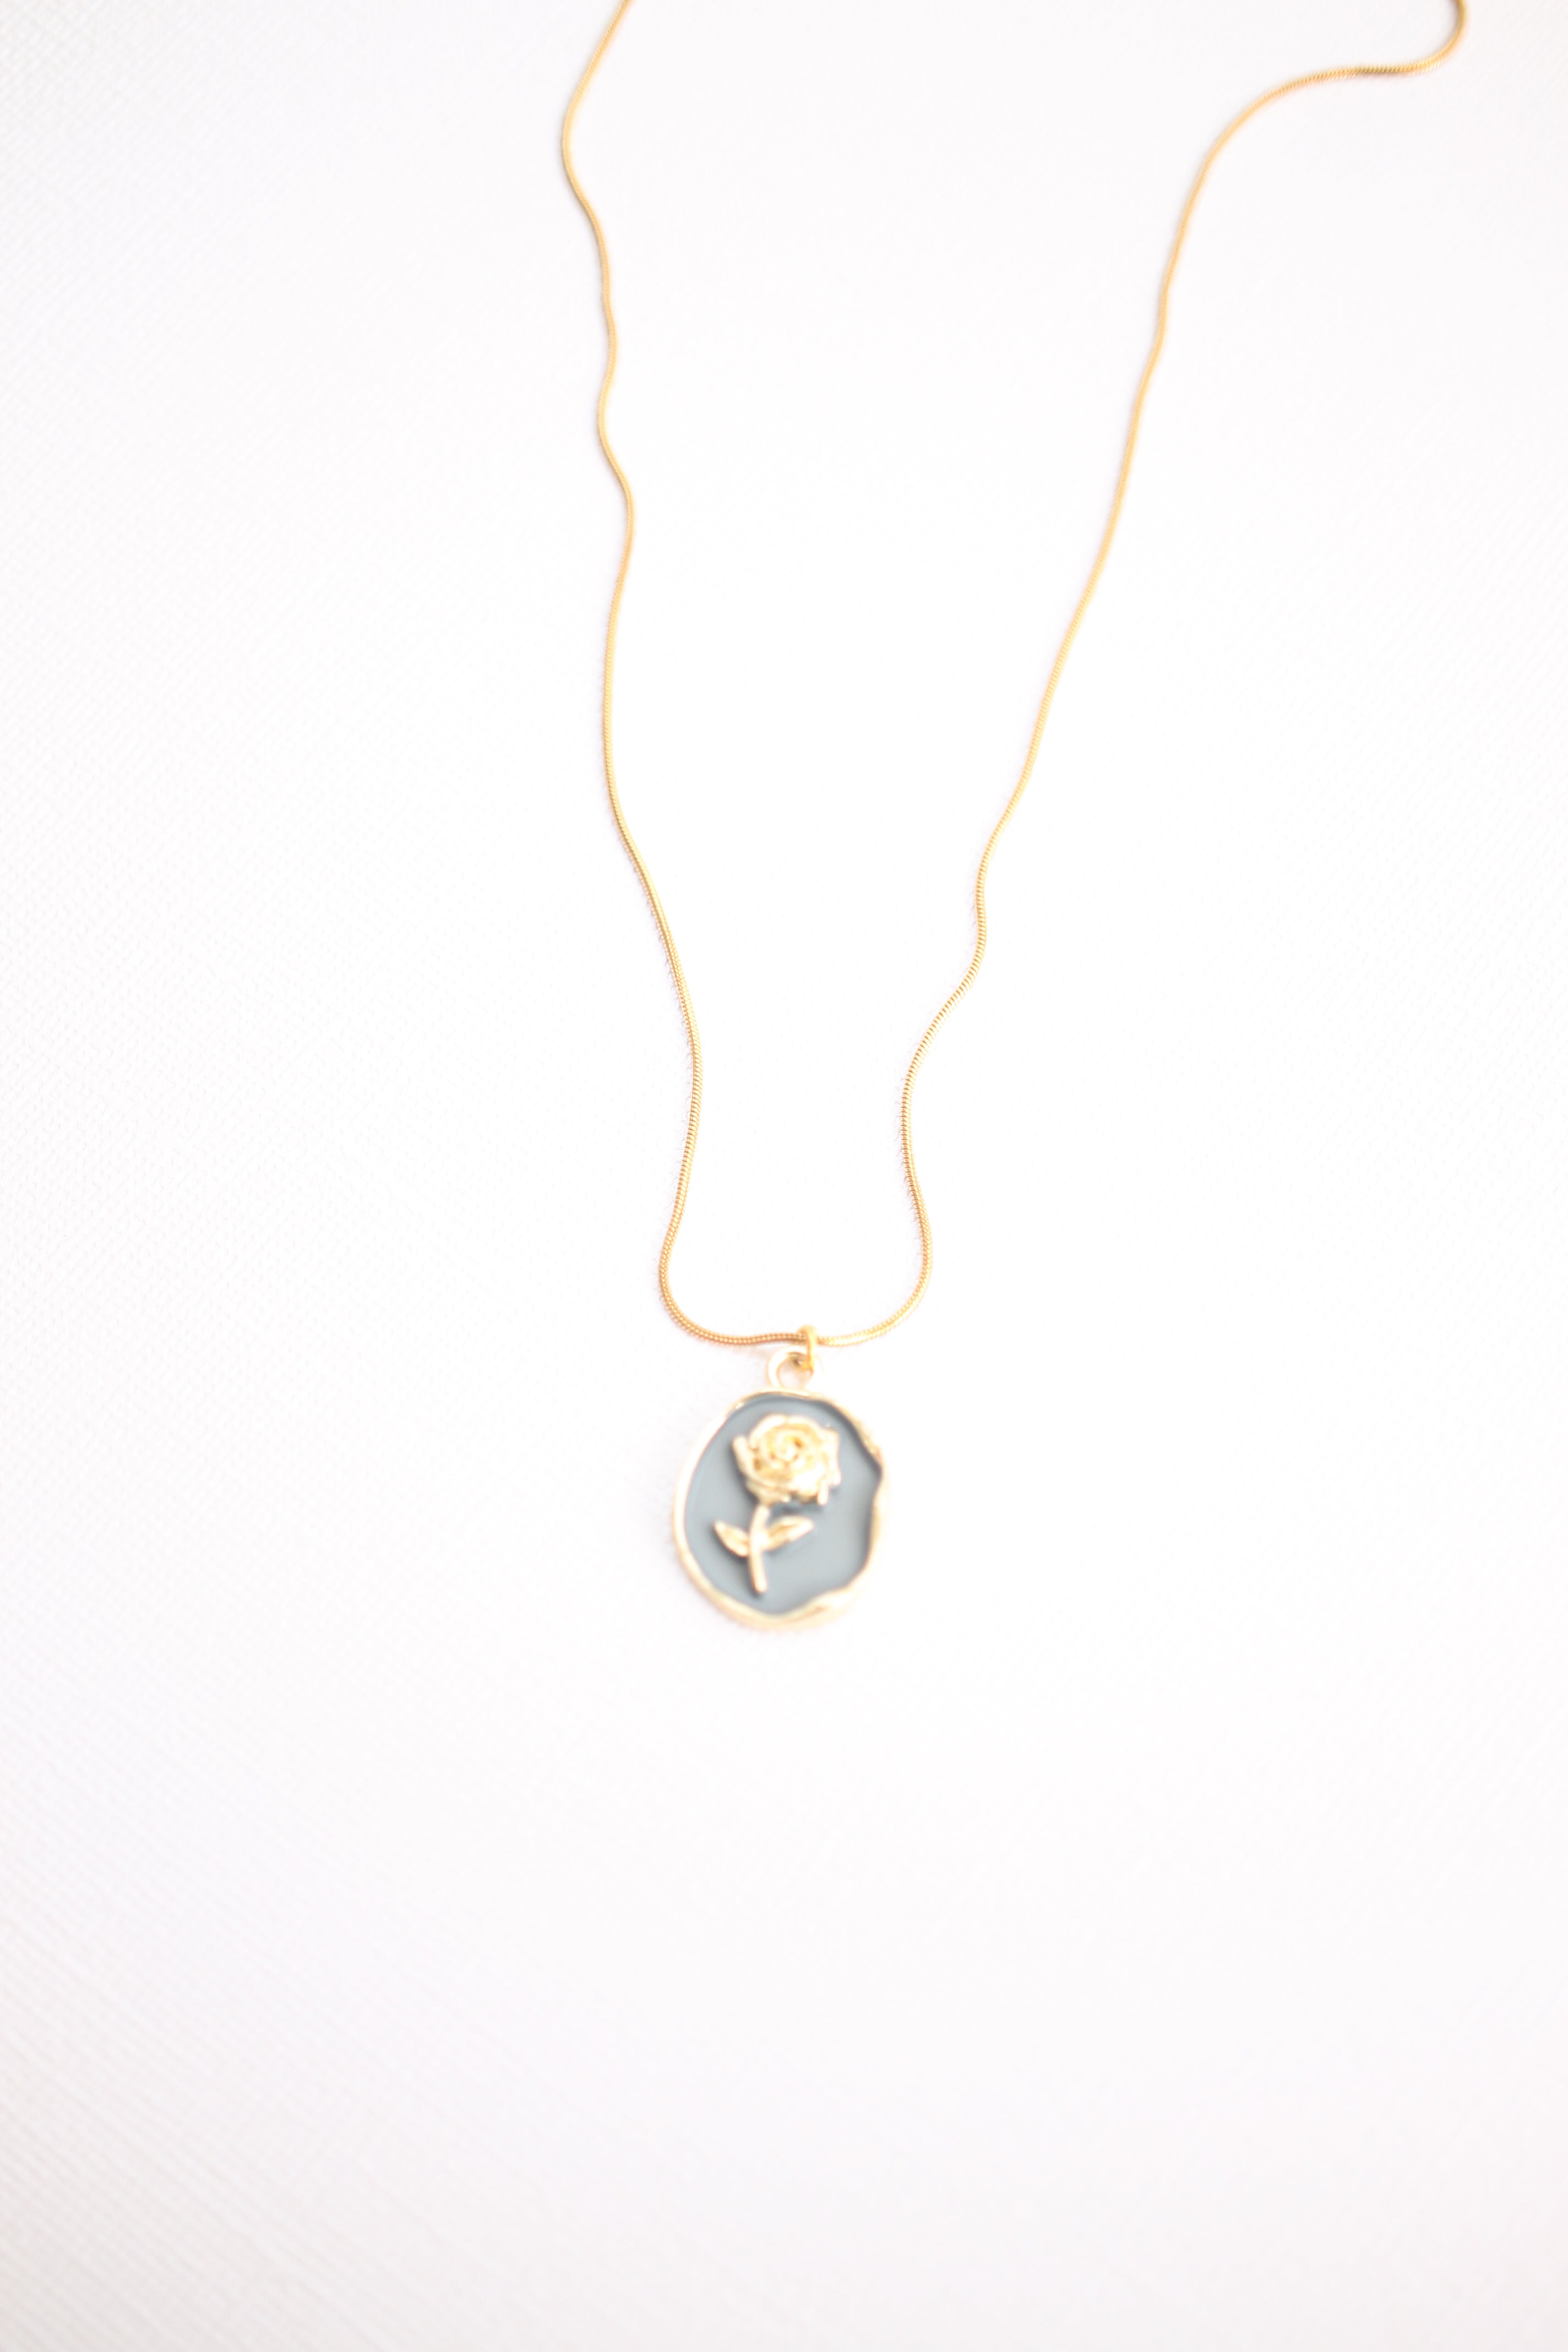 Colette Necklace in Dusty Blue